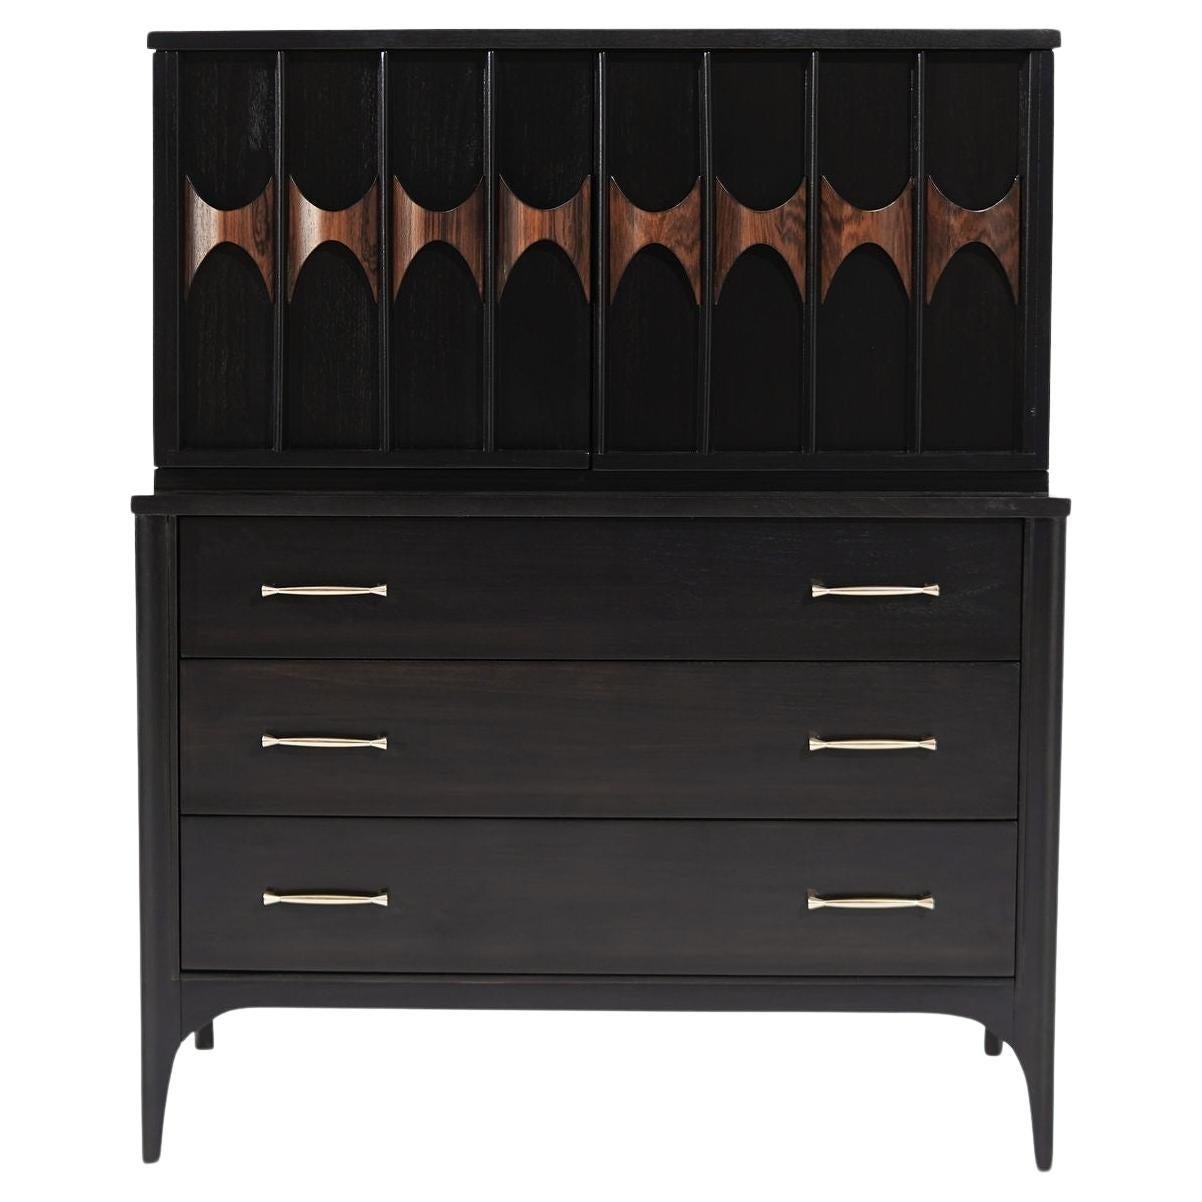 Kent Coffey Perspecta Collection Walnut and Rosewood Chest of Drawers, C. 1950s For Sale